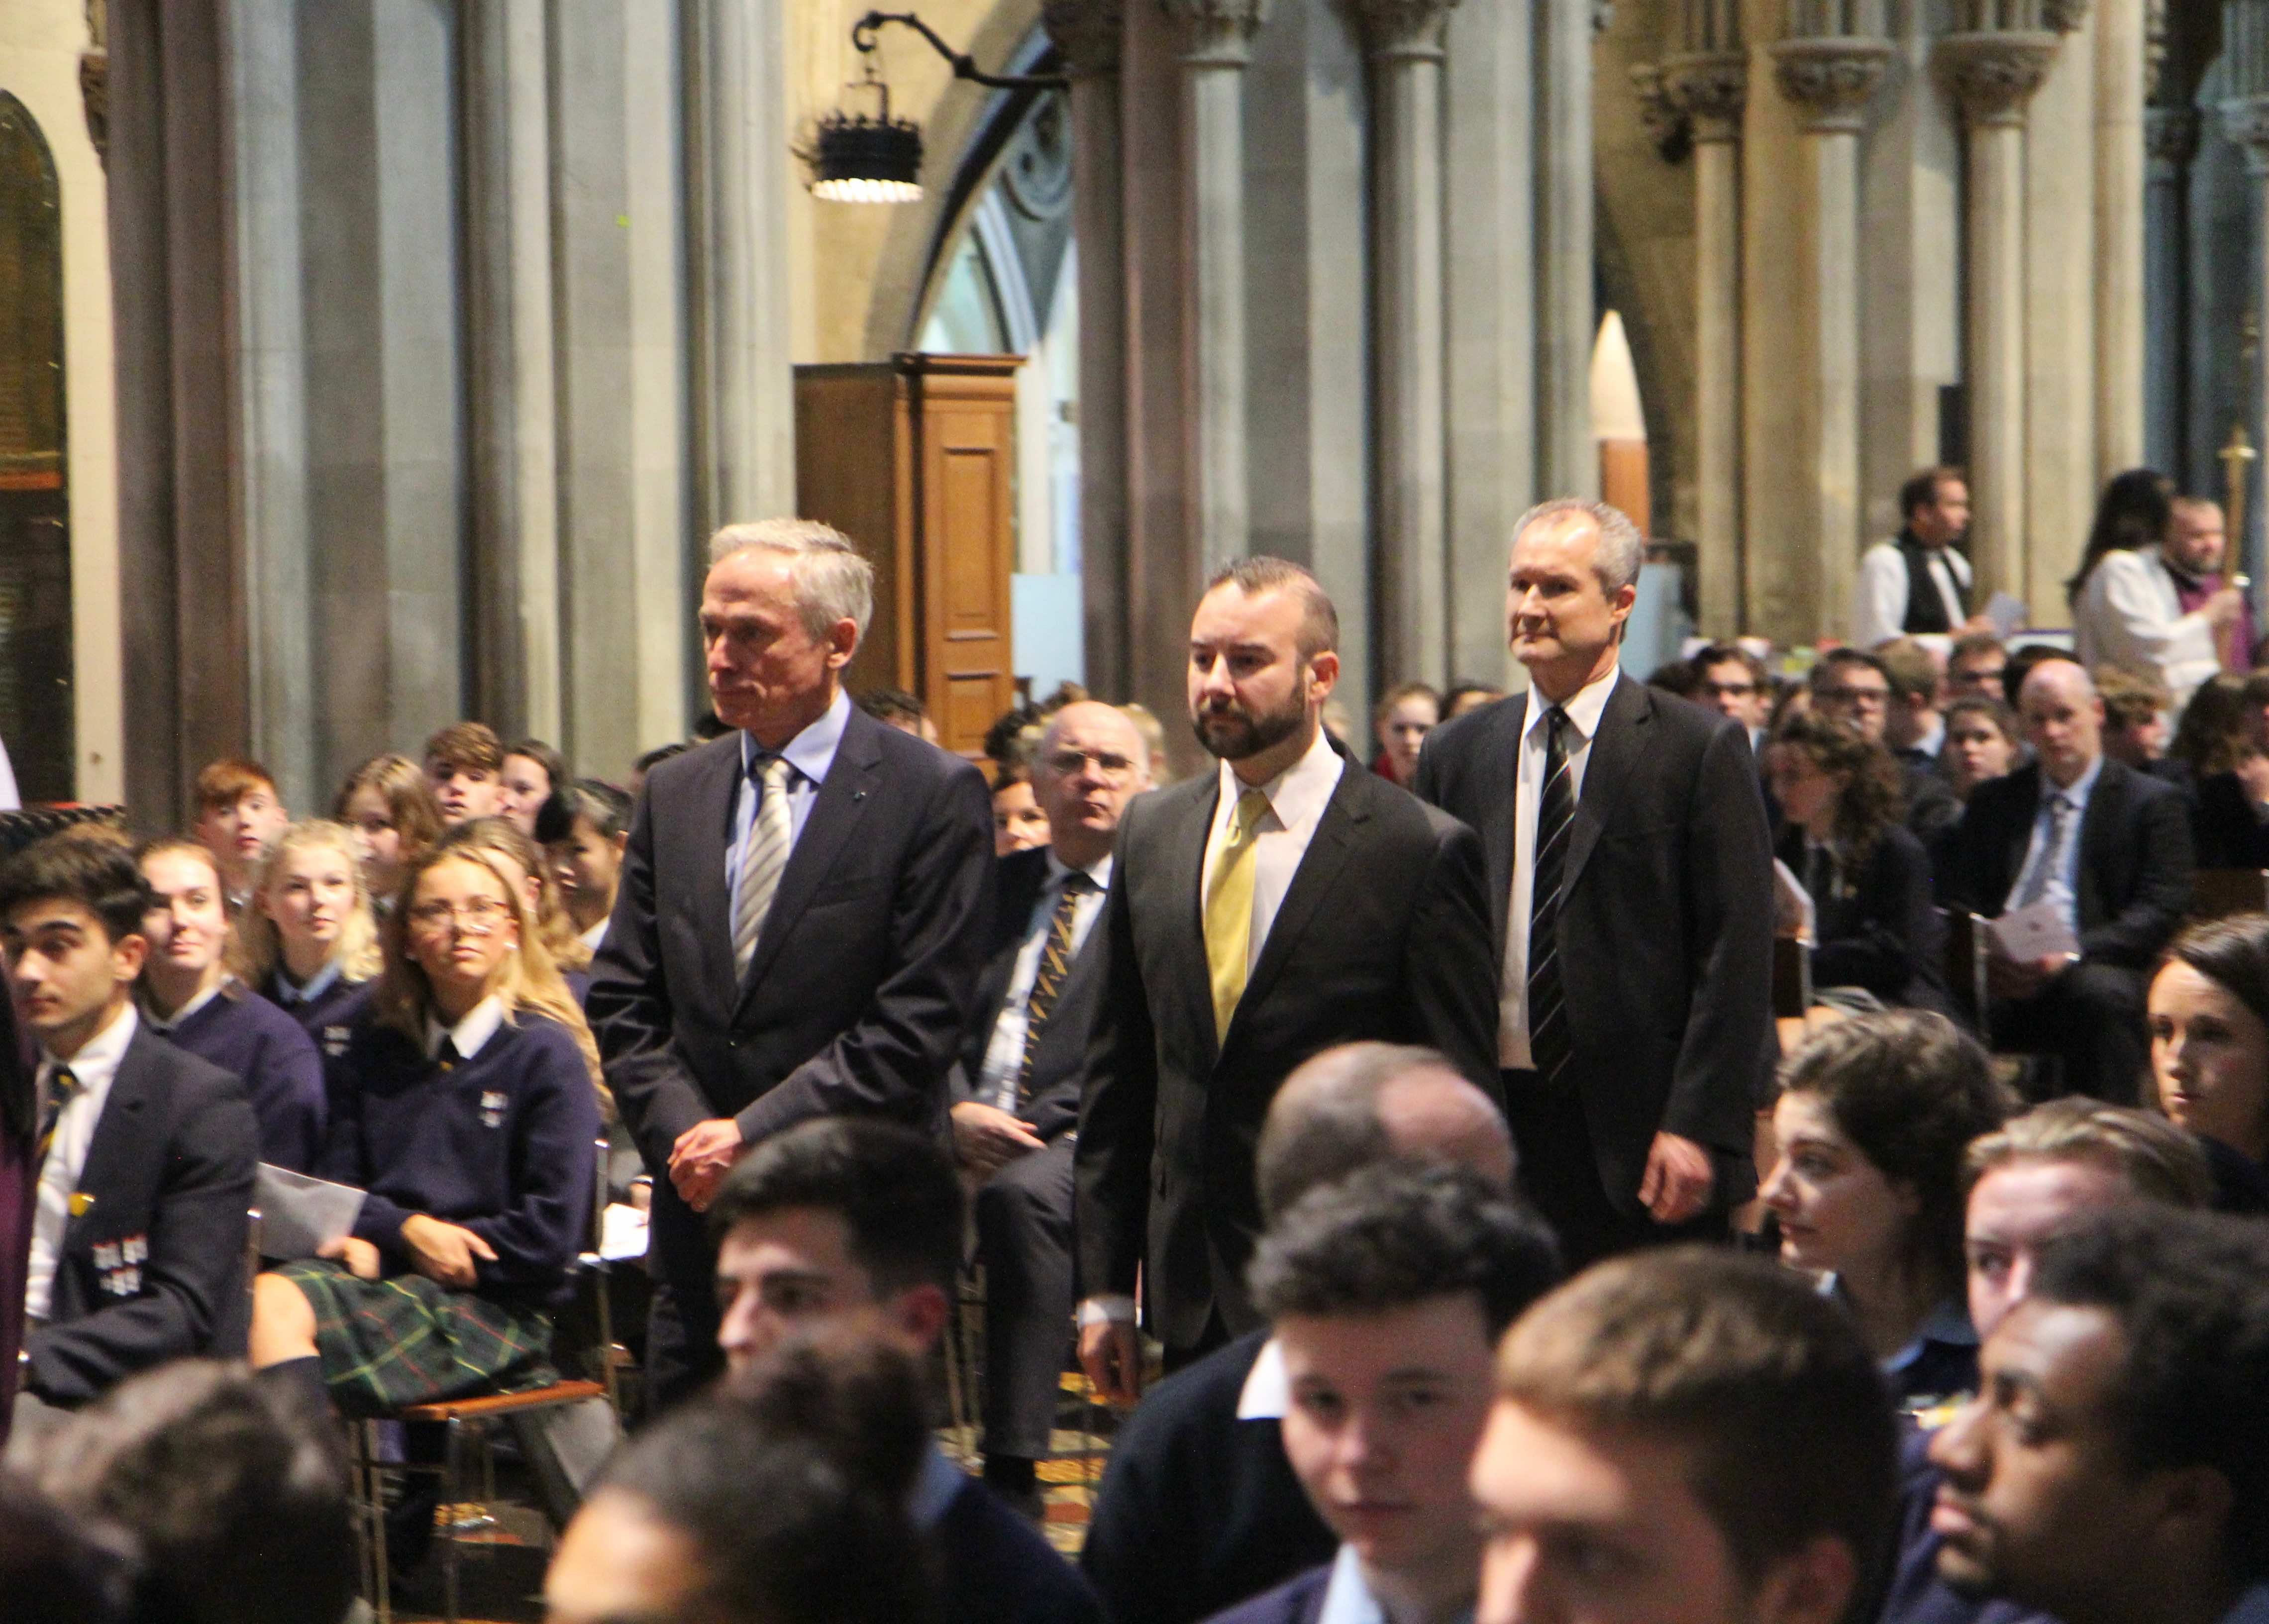 Minister for Education, Mr Richard Bruton TD arriving in St Patrick's Cathedral with Dr Ken Fennelly and Andrew Forrest of the Board of Education.